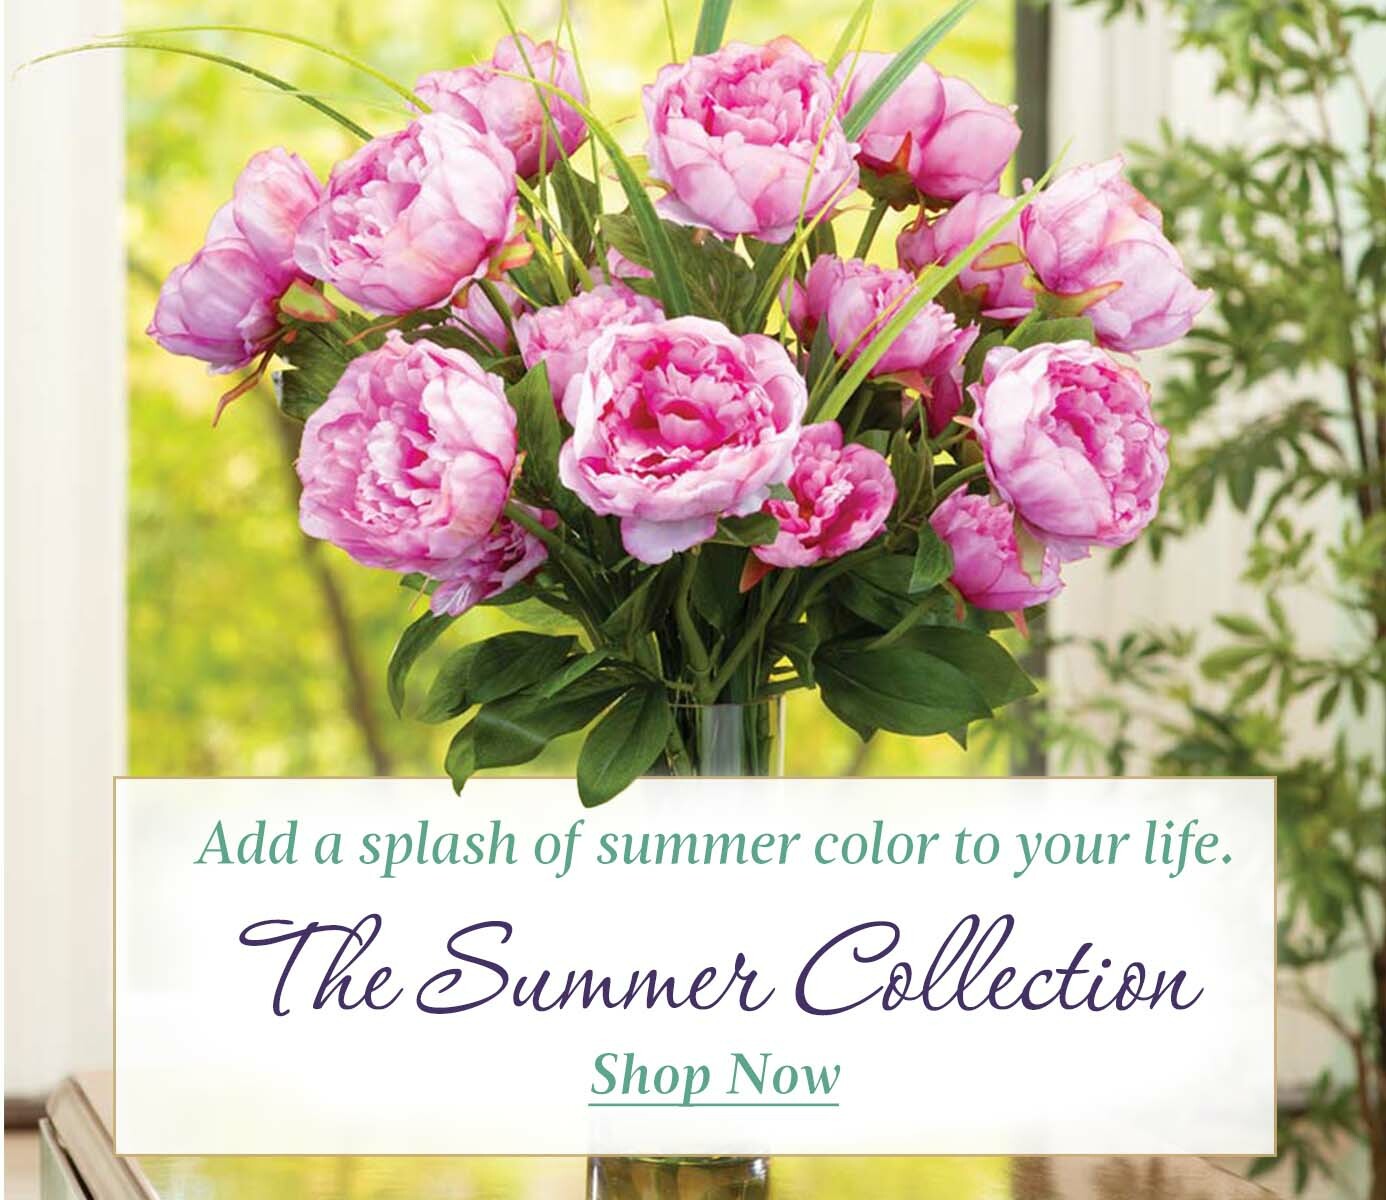 Mother's Day Gift Ideas: Our Collection features beautiful floral gifts crafted by hand for everlasting enjoyment.